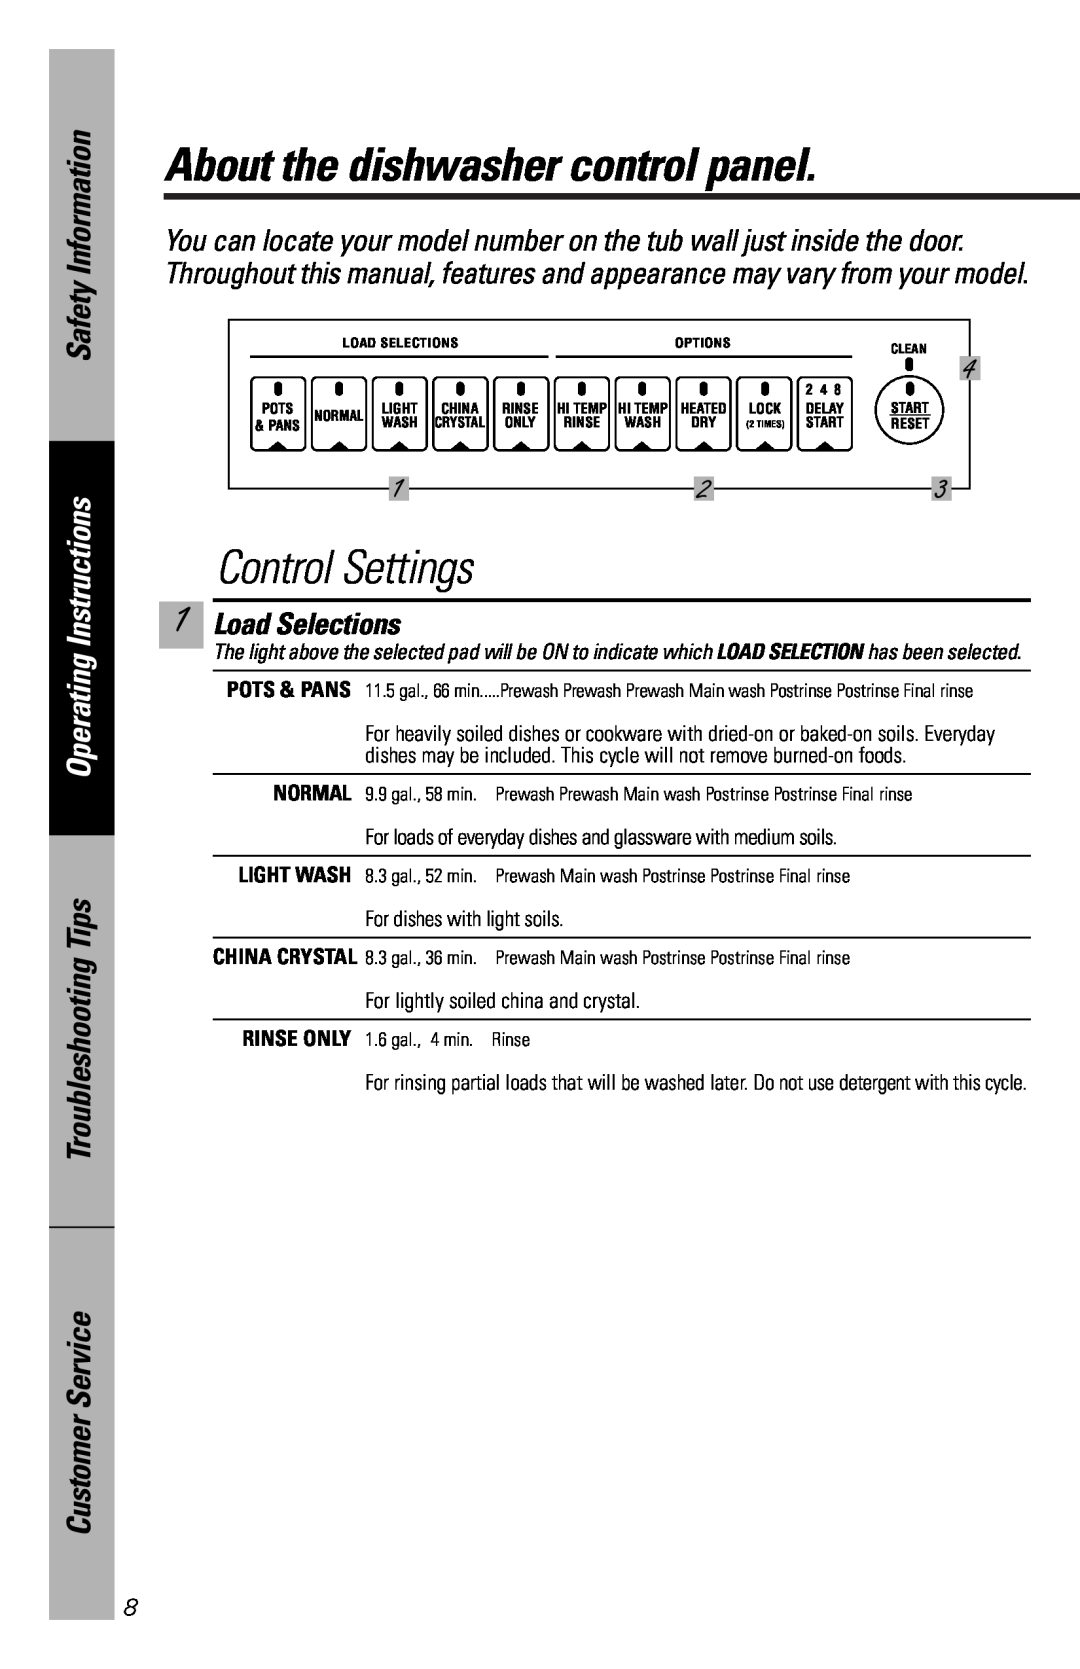 GE GSD5150 About the dishwasher control panel, Control Settings, Safety Information, Operating Instructions, Normal 